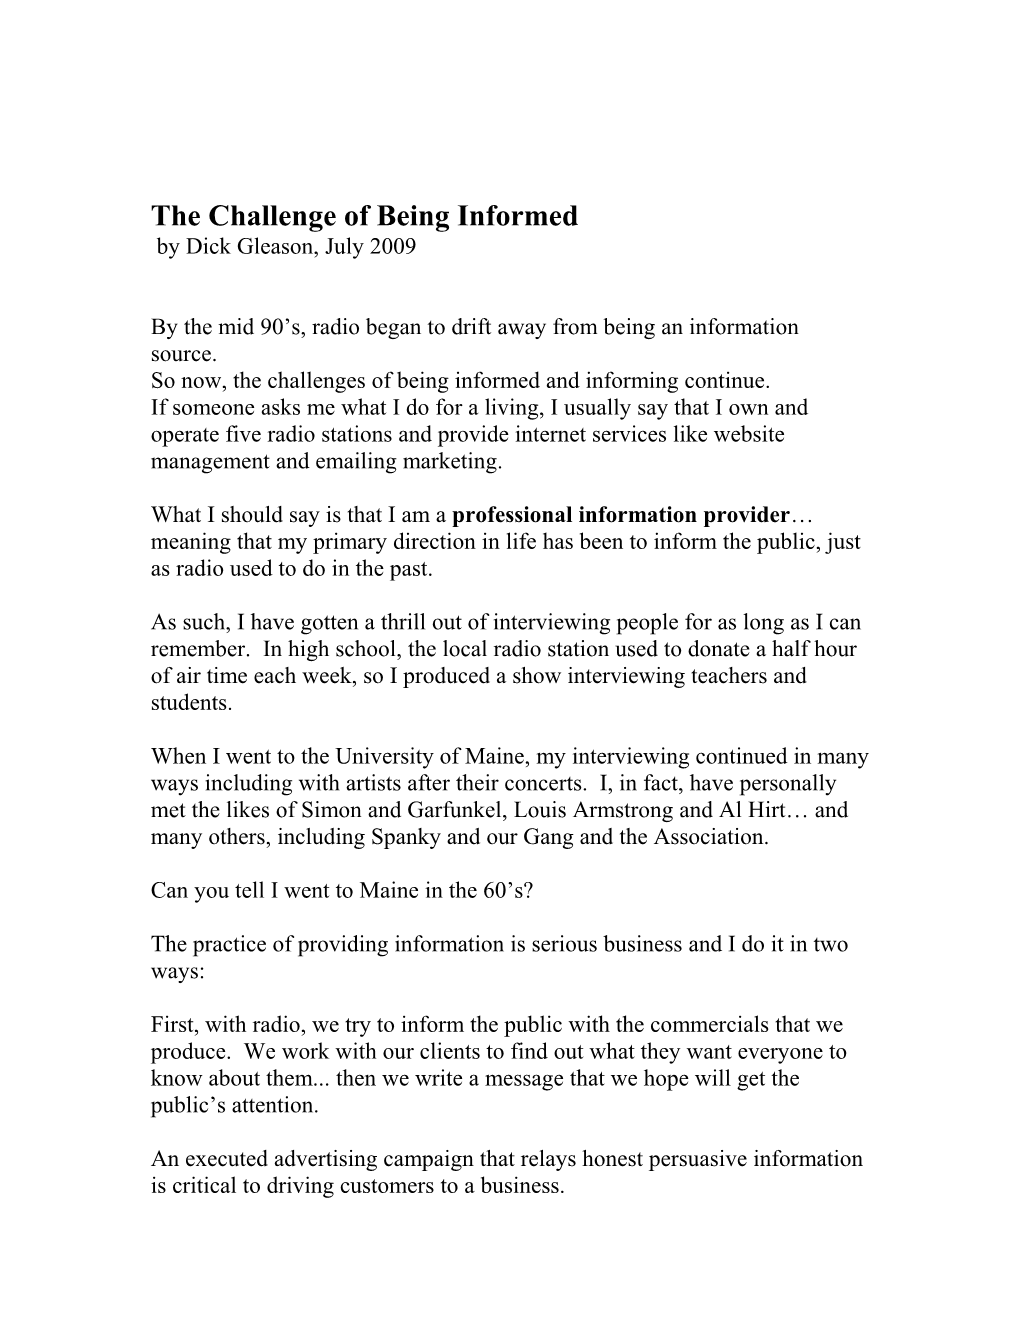 The Challenges of Being Informed